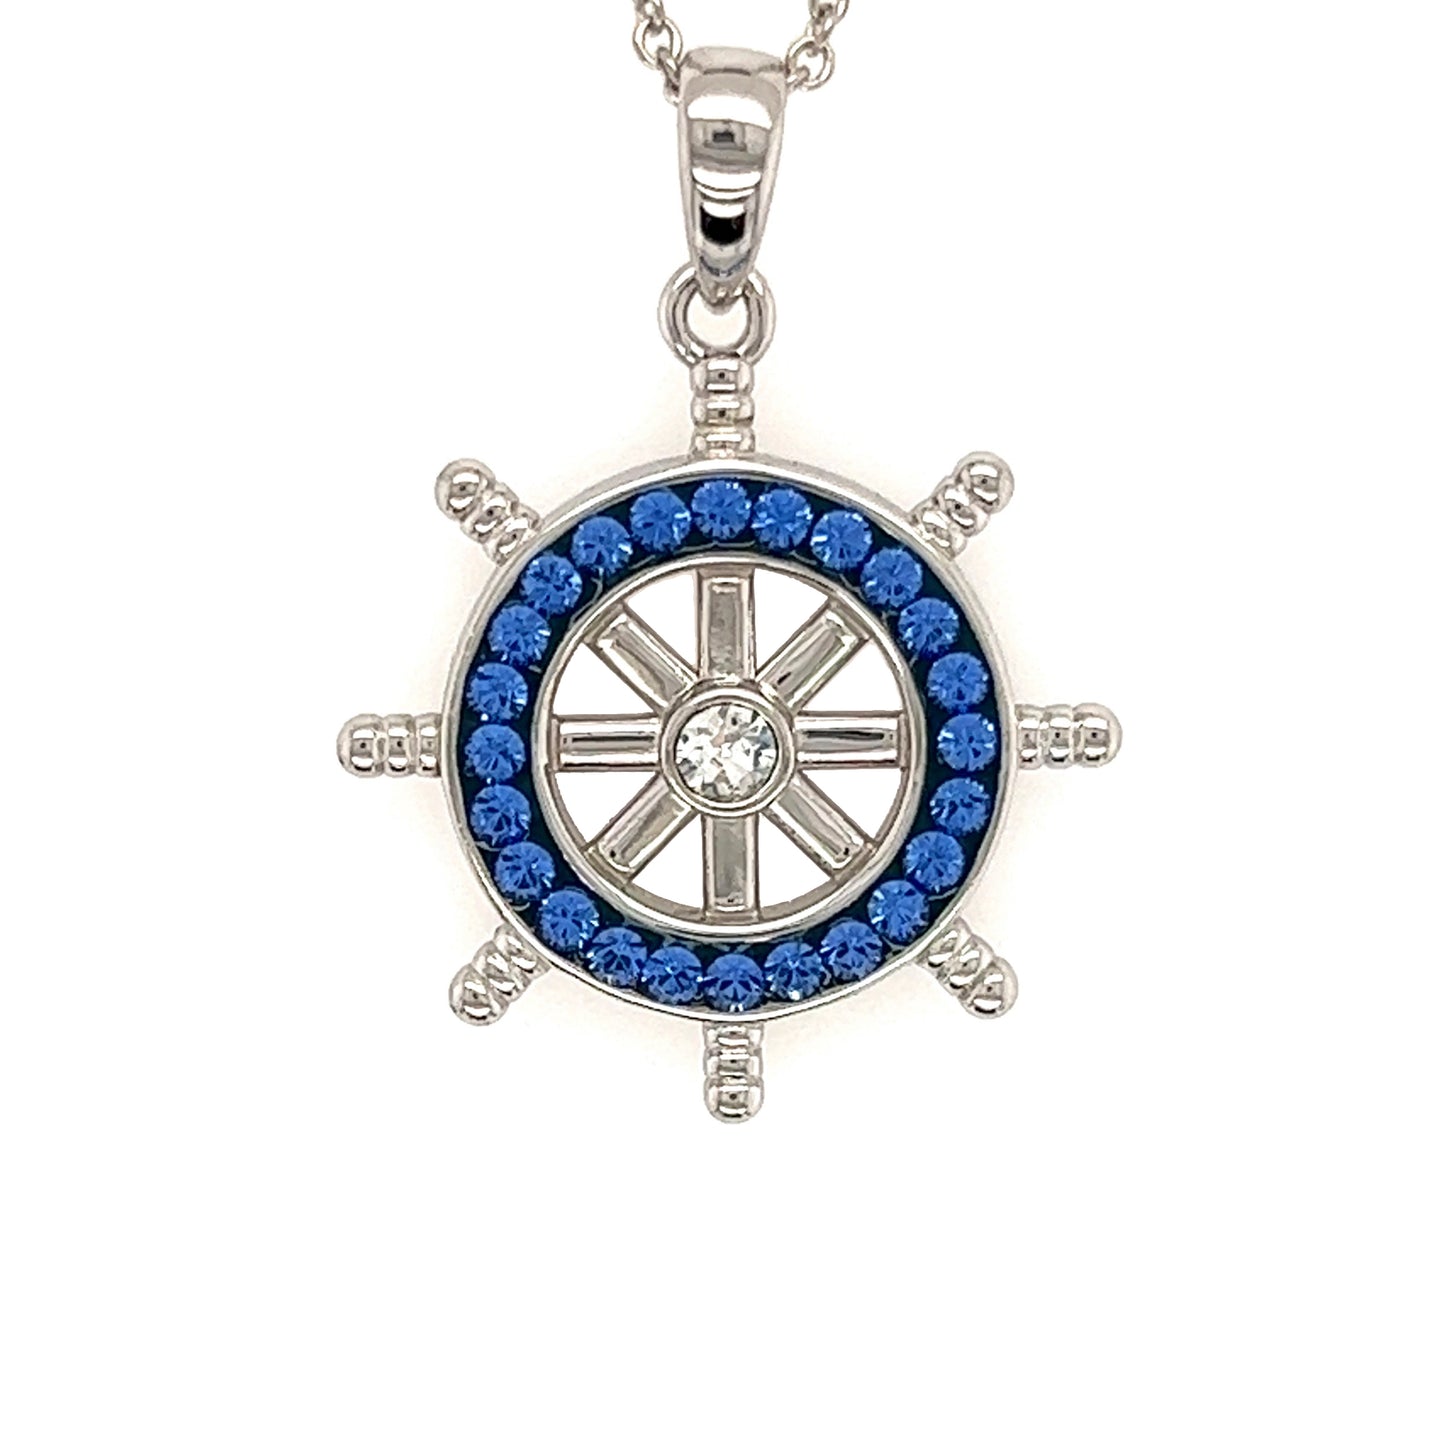 Ship's Wheel Necklace with Blue Crystals in Sterling Silver Pendant Front View